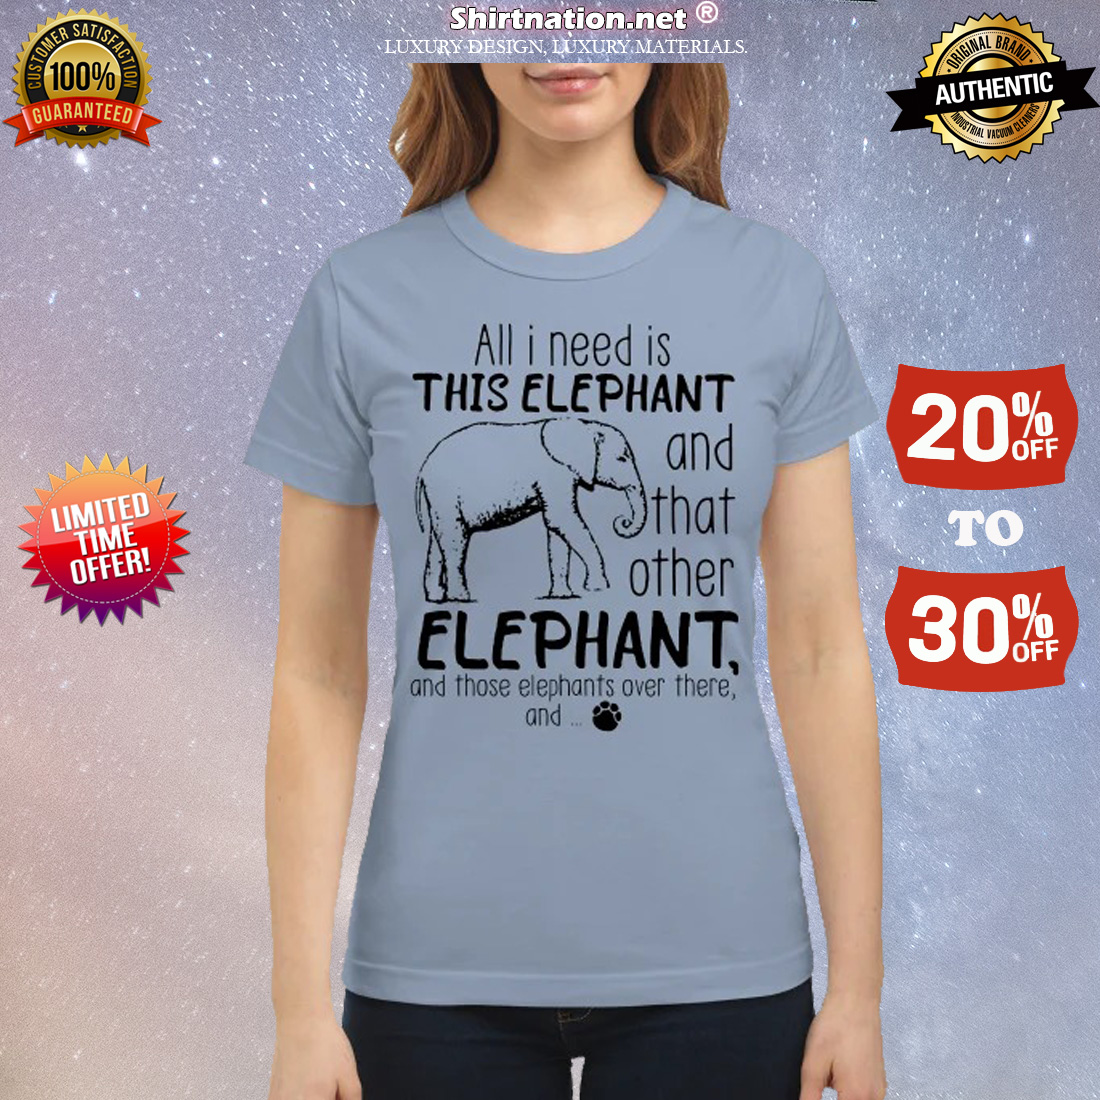 All I need is this elephant and that other elephant classic shirt